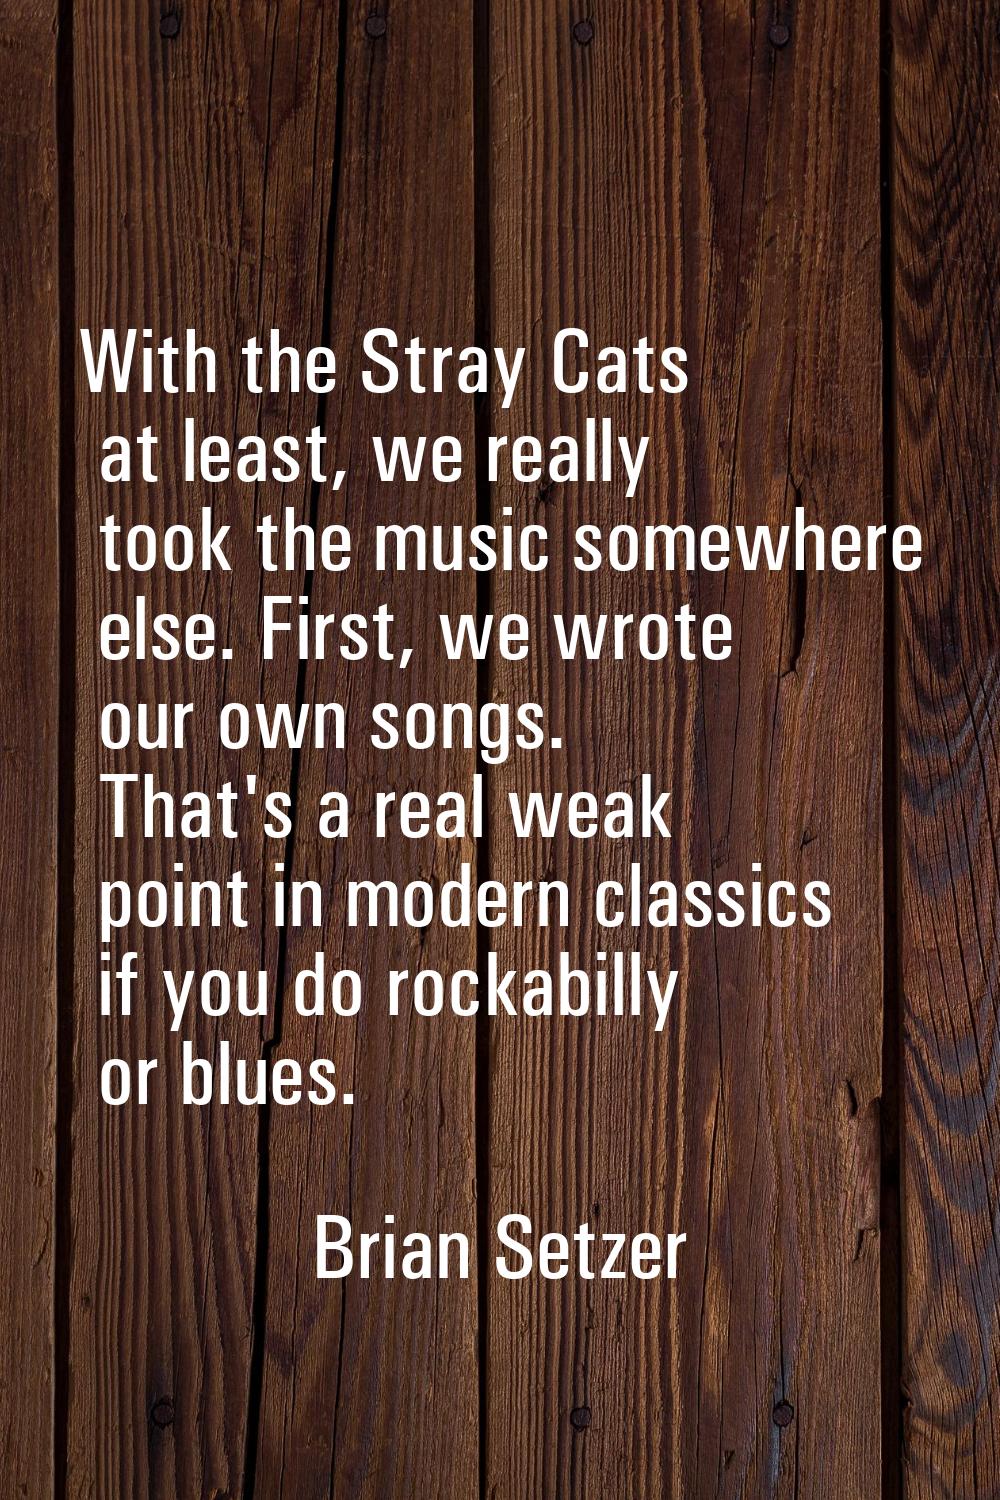 With the Stray Cats at least, we really took the music somewhere else. First, we wrote our own song